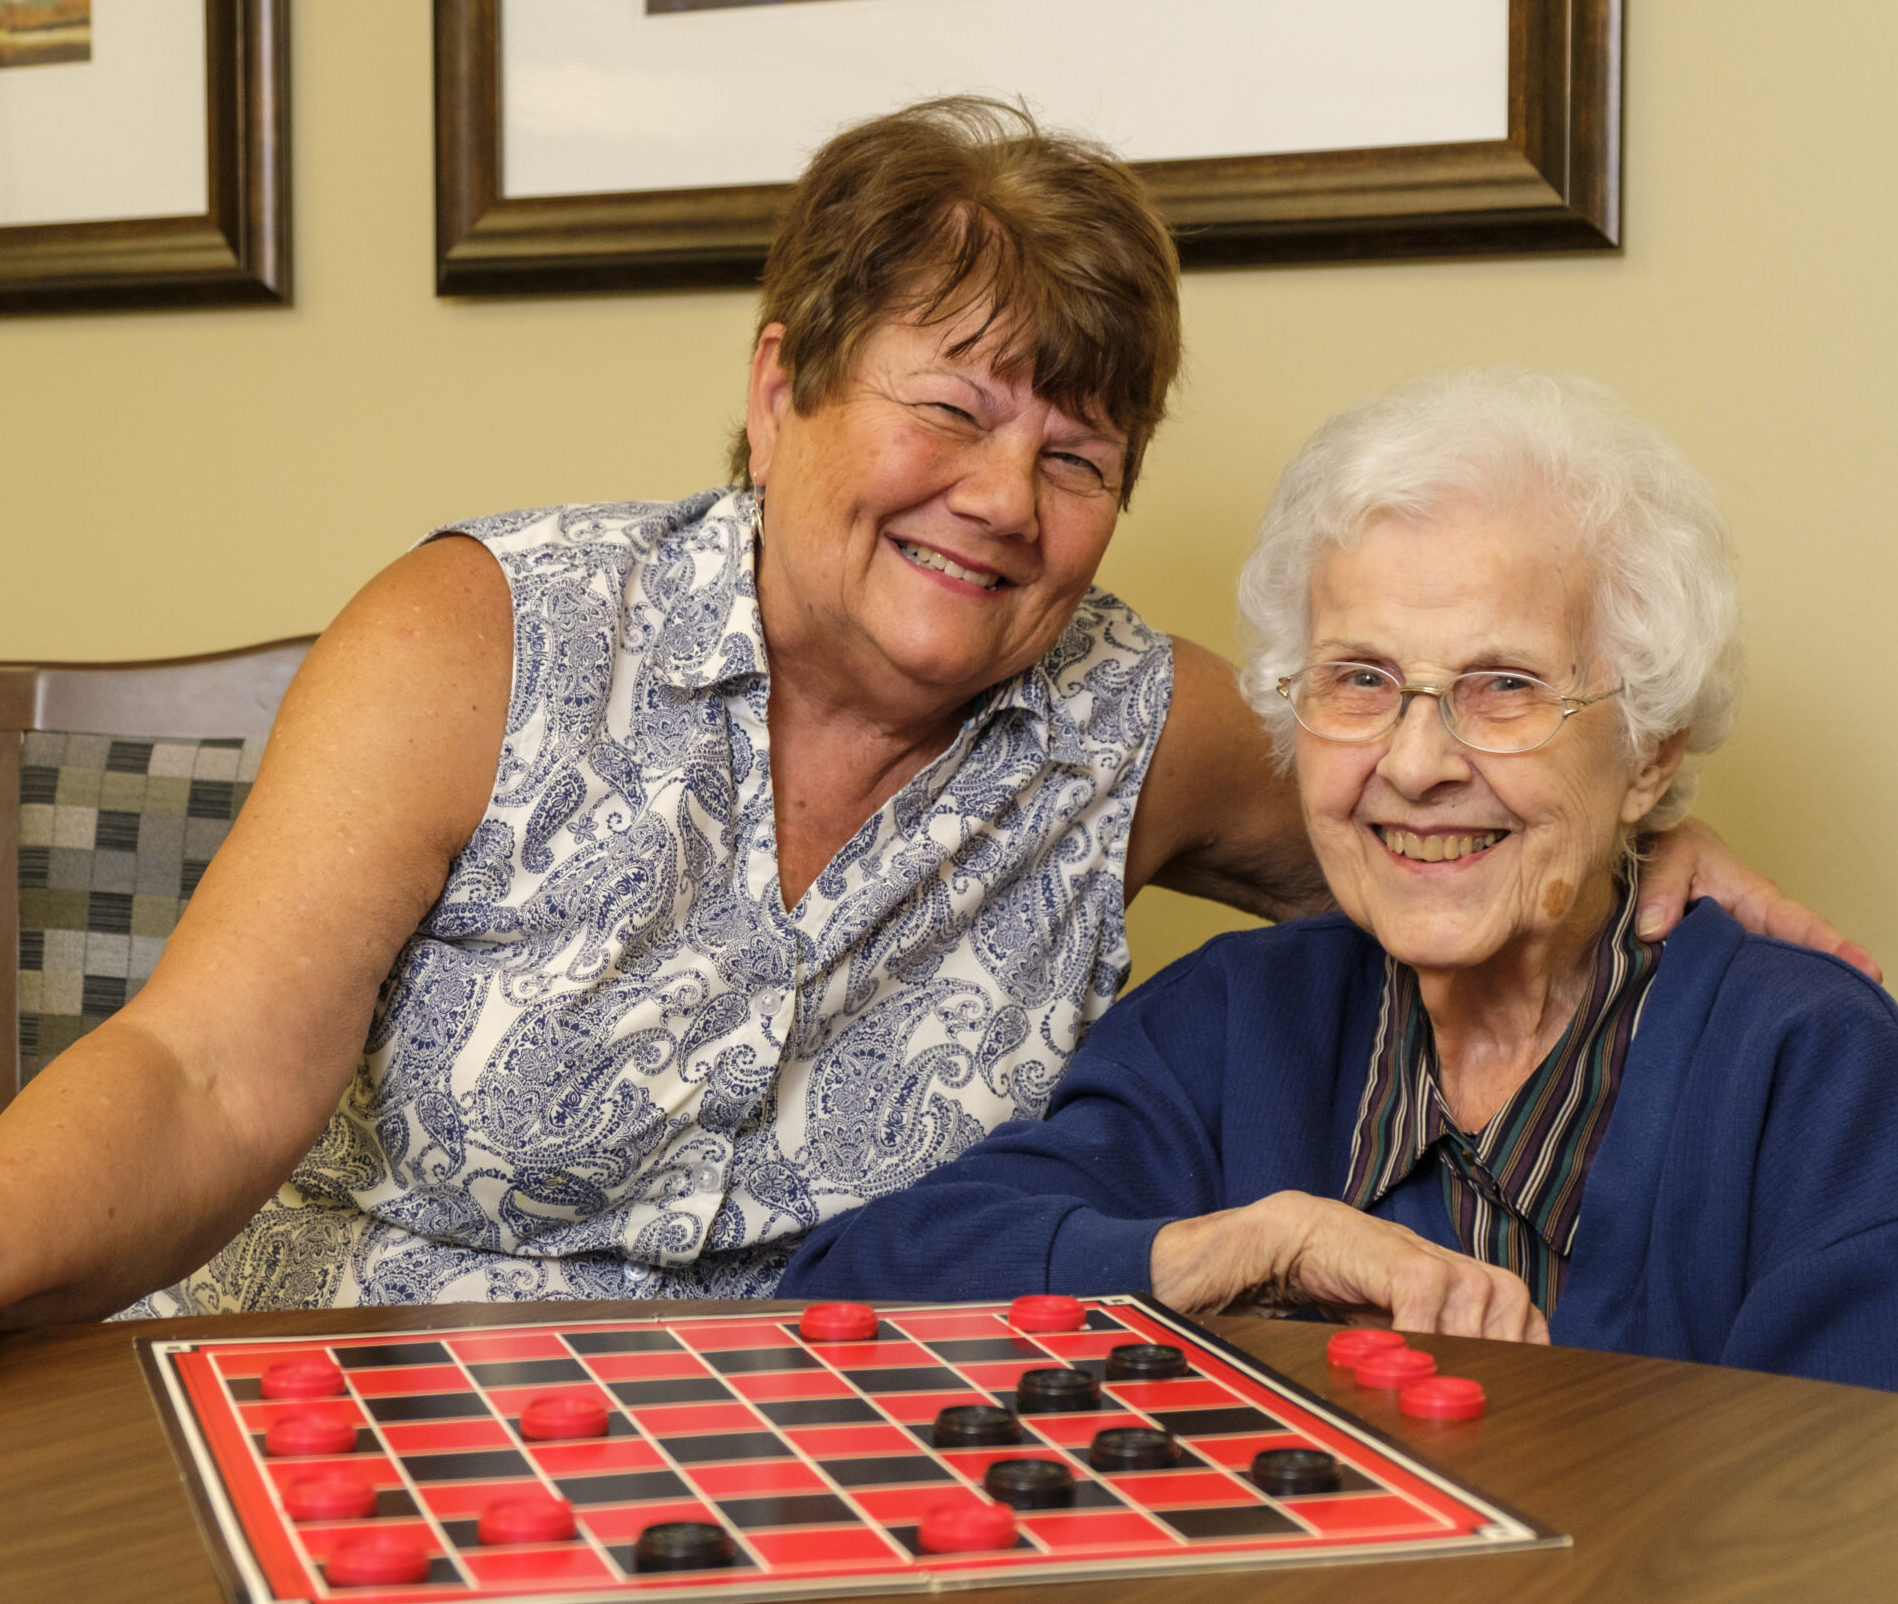 West Park resident and family play checkers